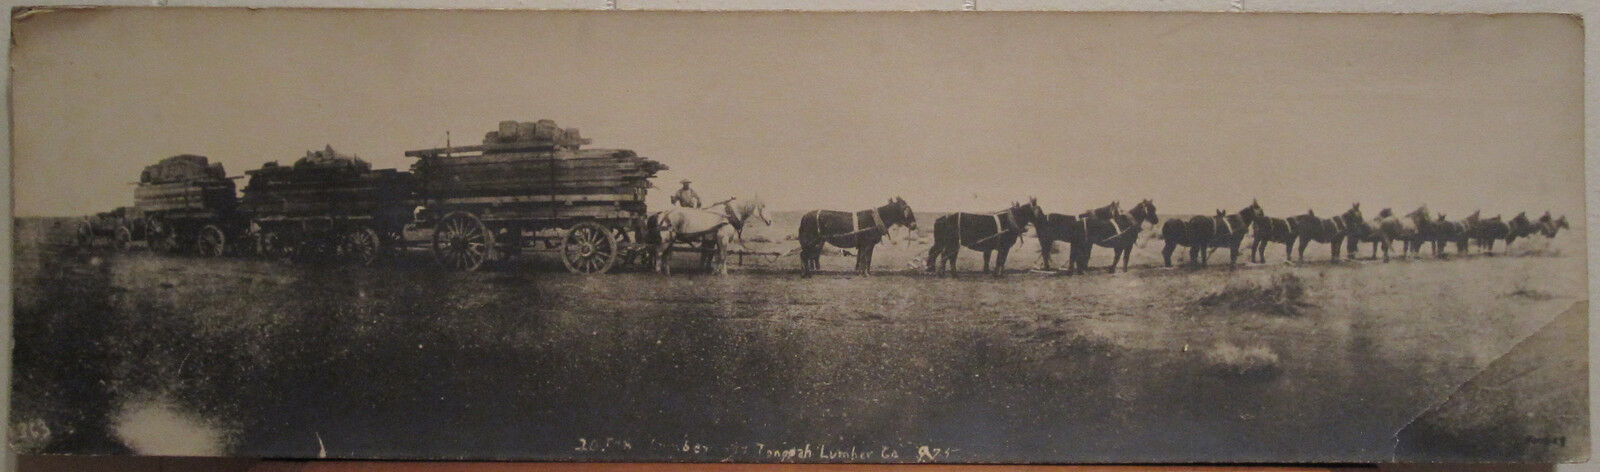 ANTIQUE AMERICAN 20 MULE TEAM ARTISTIC FORBES ARTIST MIDWEST OR WESTERN PHOTO